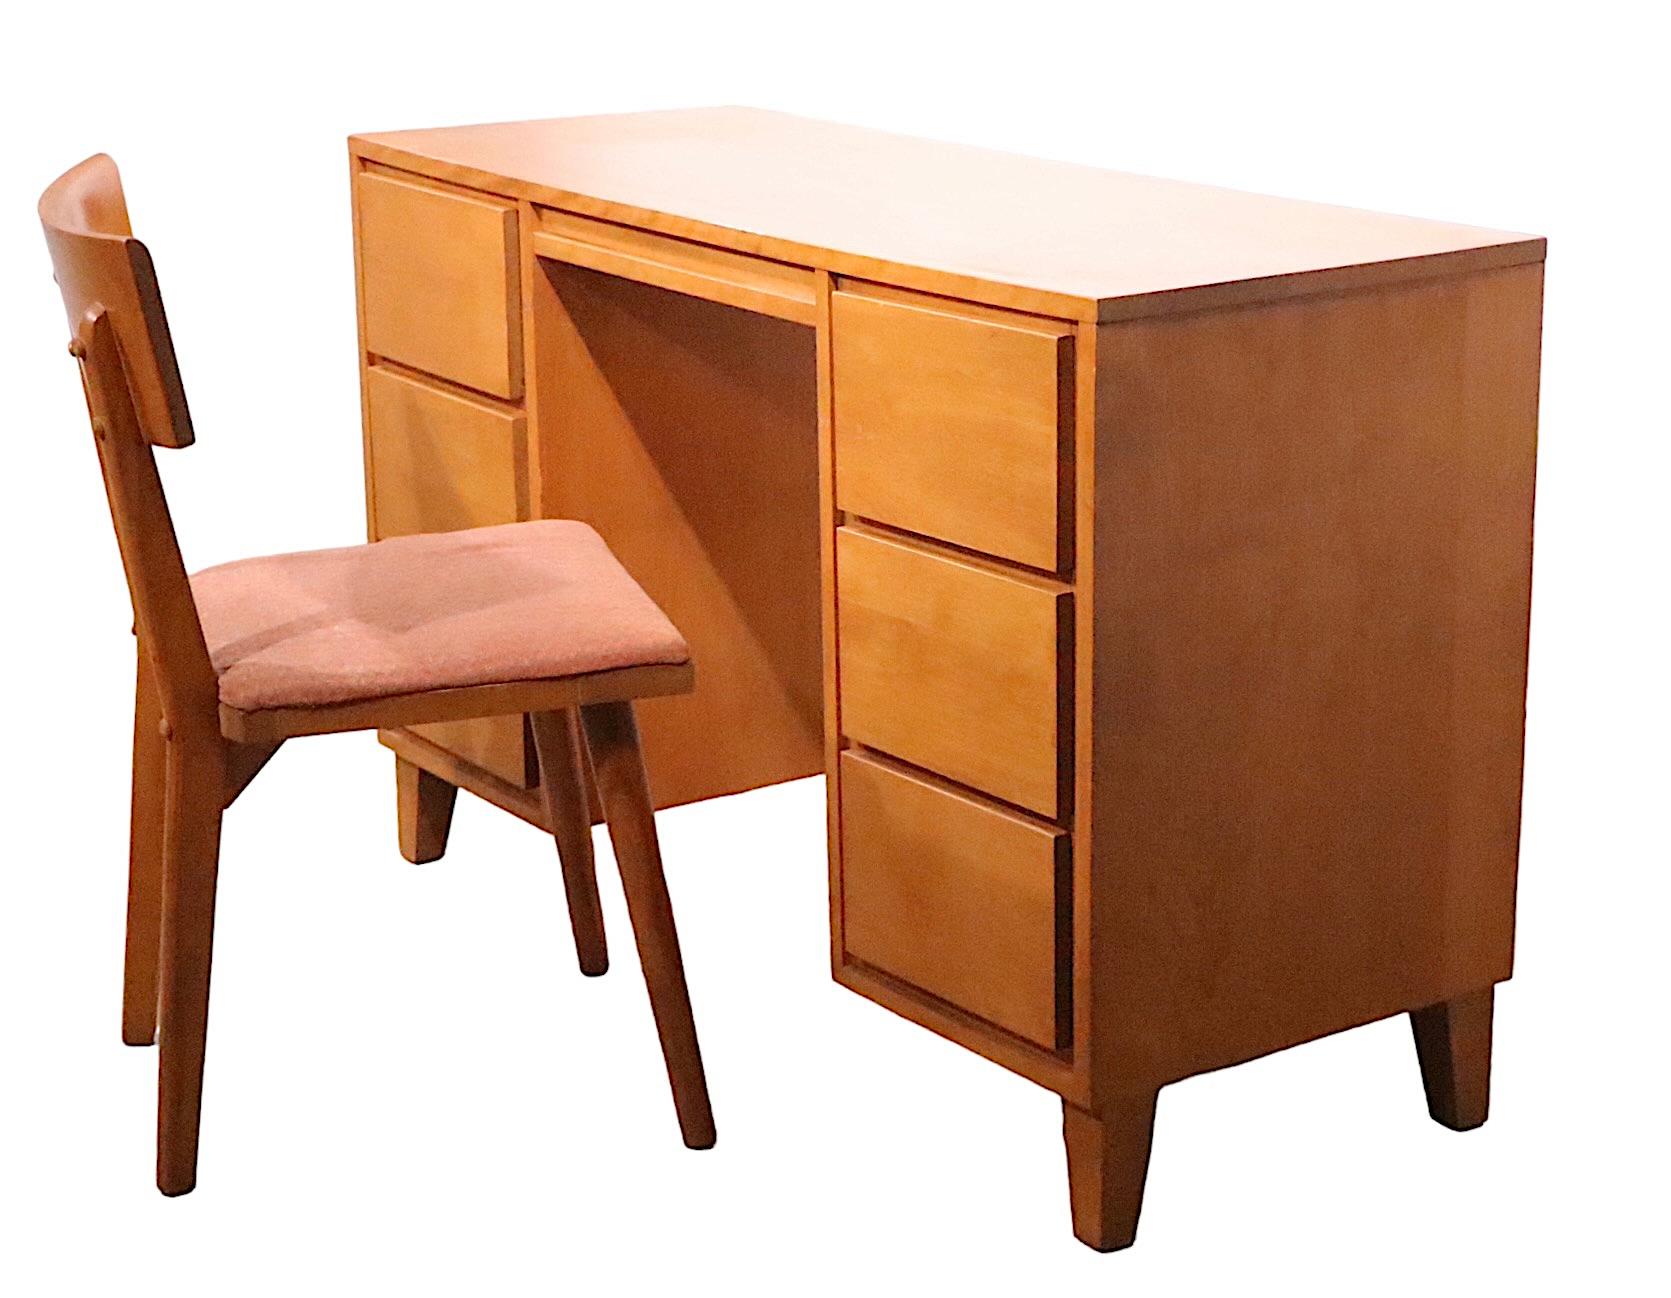 1950's Mid Century Desk and Chair Conant Ball  Modern Mates by Leslie Diamond   For Sale 3